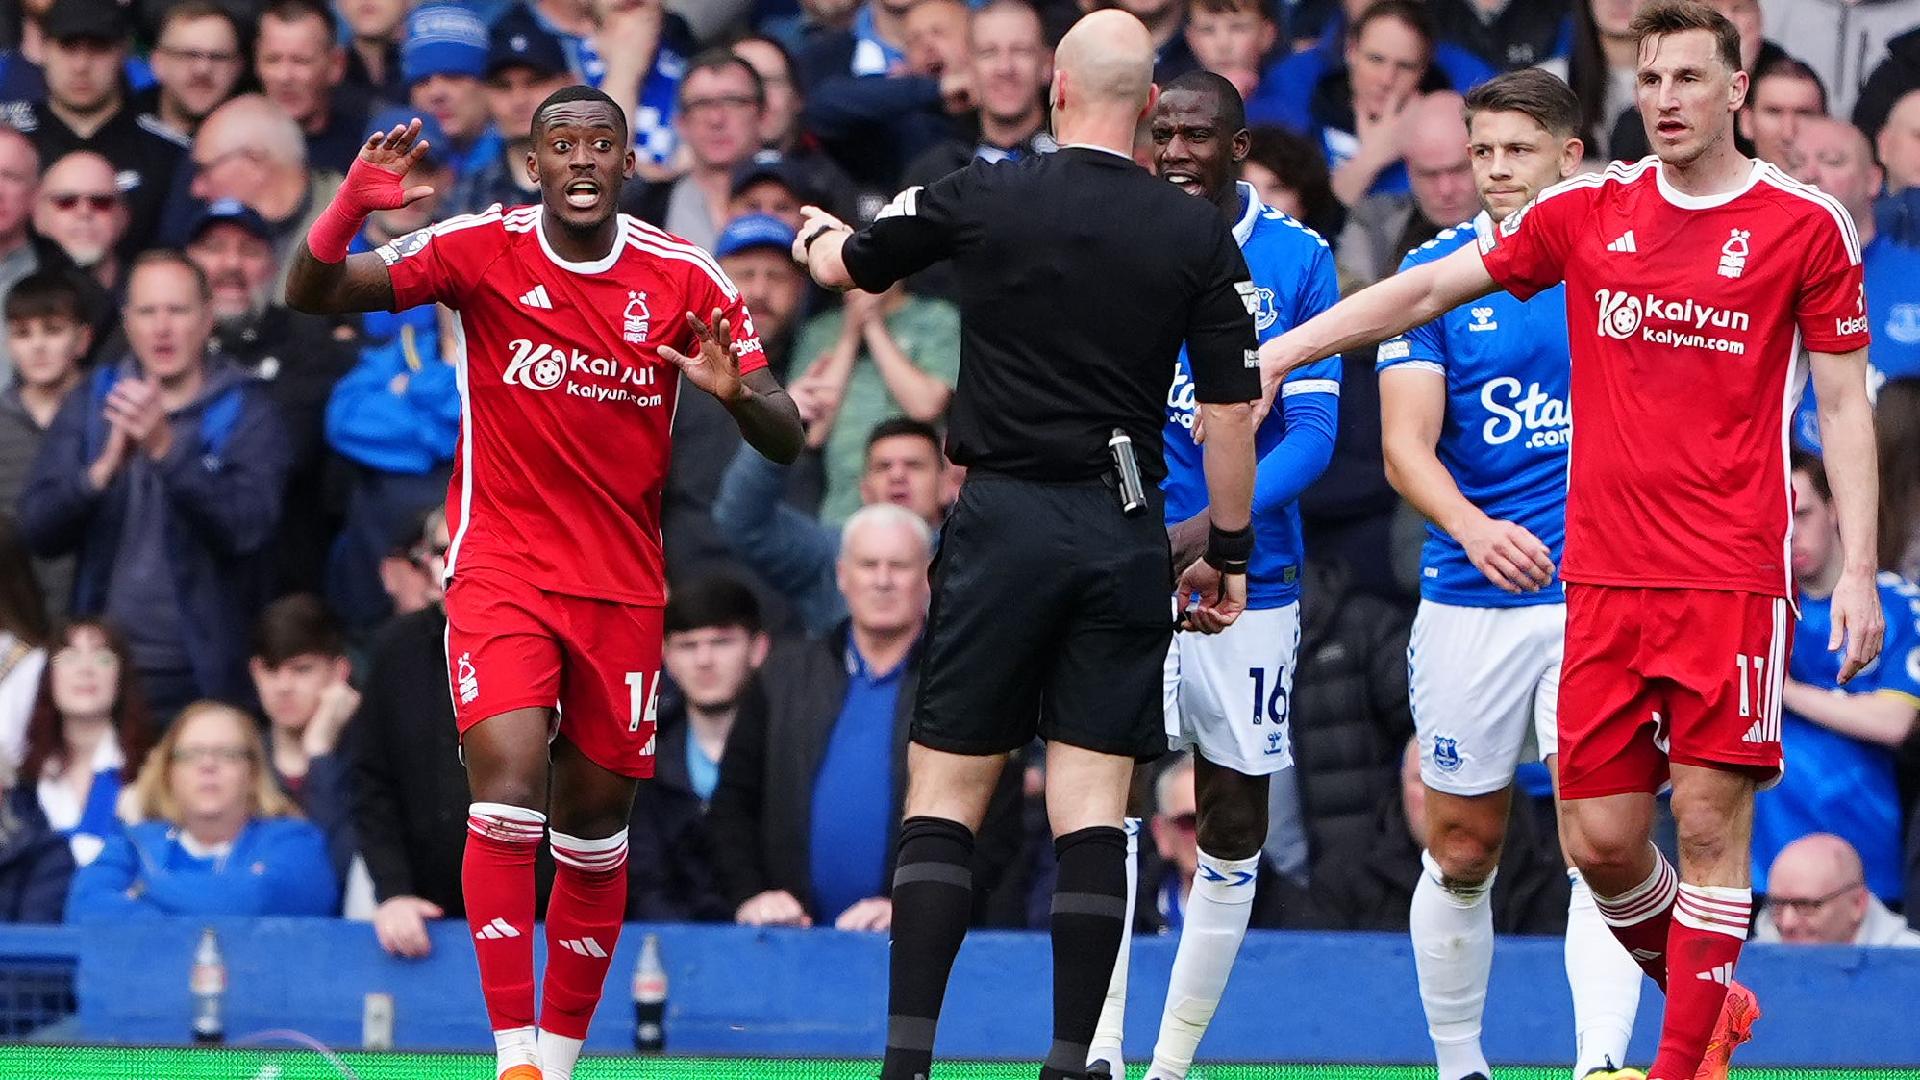 Nottingham Forest want VAR audio to be released after rejected penalty claims